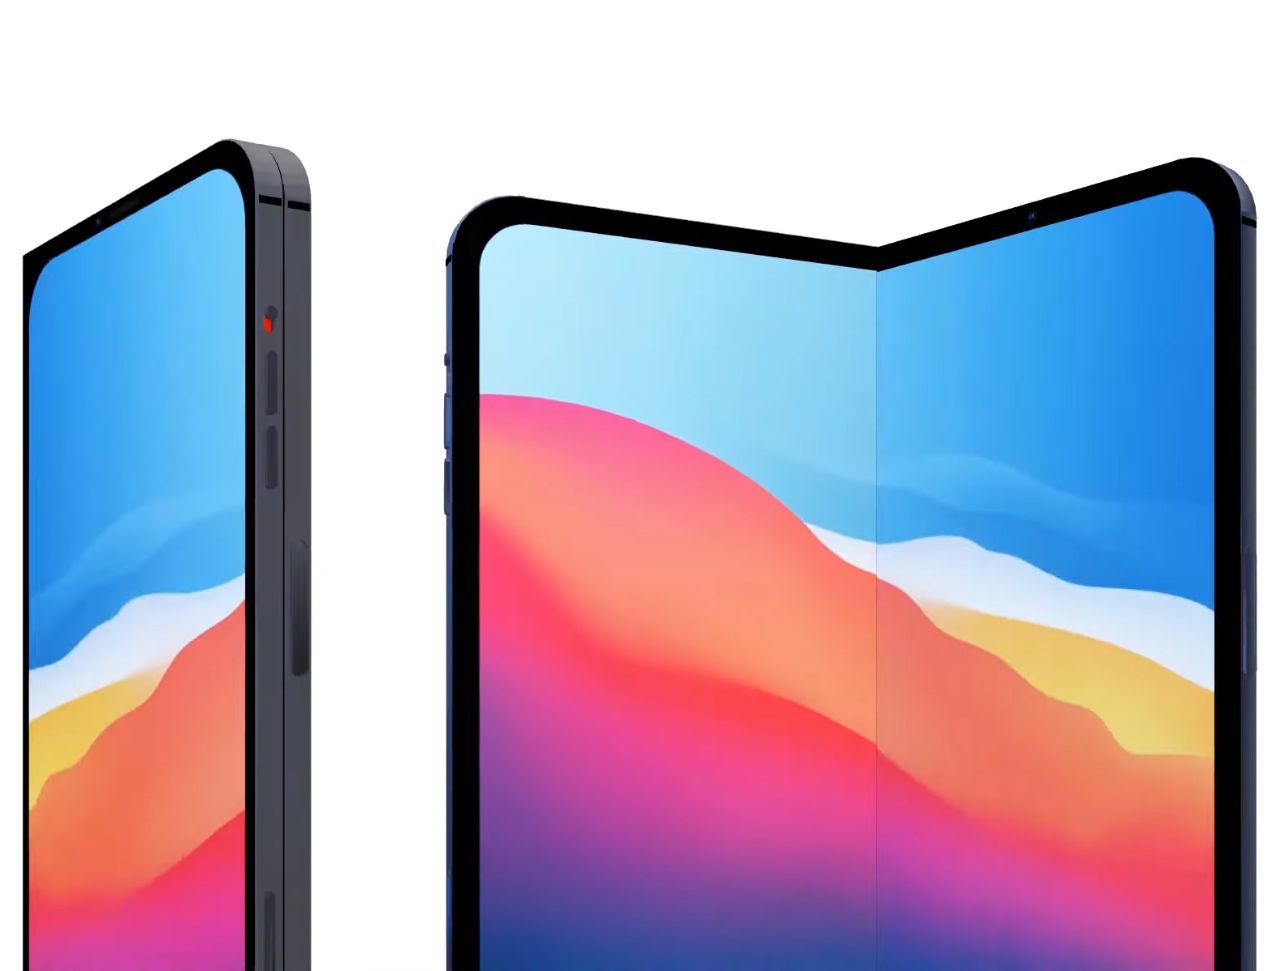 Iphone 13 Fold Apple S Foldable Iphone 13 Concept May Unfold Like The Galaxy Z Fold 2 Or Motorazr What S Your Pick Yanko Design While The Iphone 13 Is